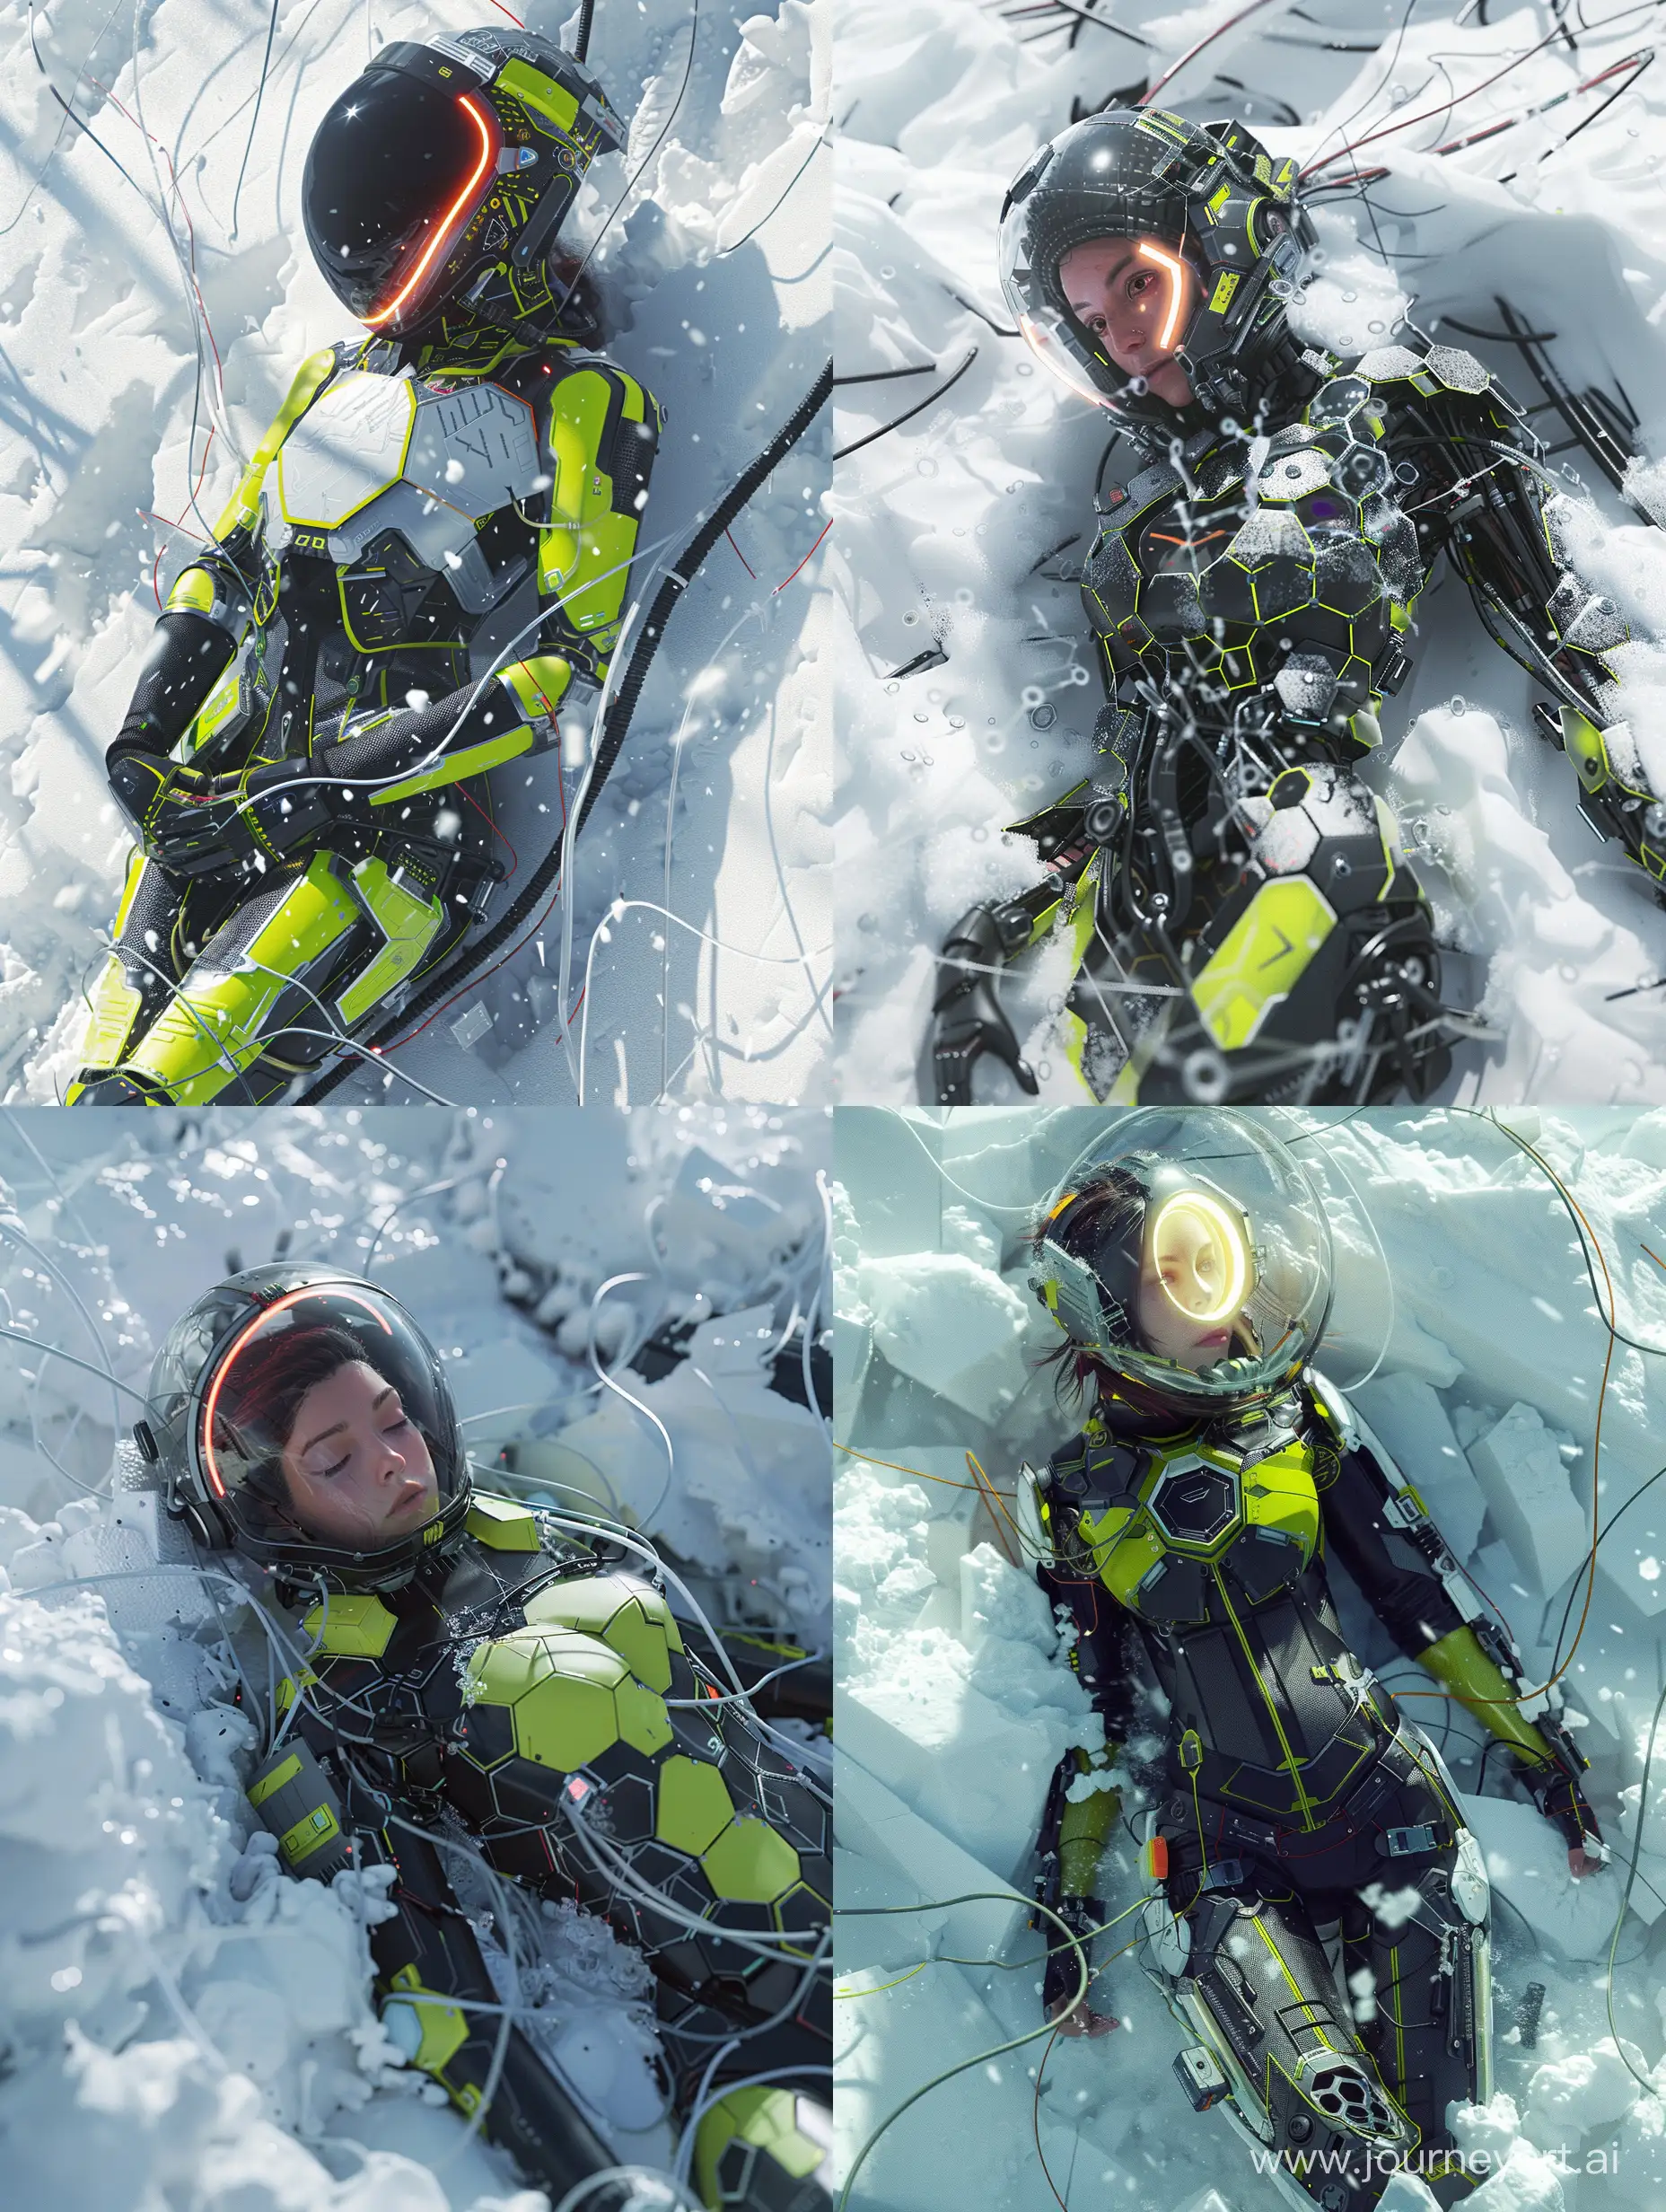 a half body mid journey V6 super high quality,high definition, high resolution, high detail cinematic worm view dynamic scene where a cyberpunk female with a halogen like helmet side amidst a vibrant volumetric completely white snowy and icy landscape,The armor she is wearing is partially transparent, revealing the hexagonal black and lime armor which is adorned with intricate detailing, seamlessly integrating advanced technological enhancements on the armour. Volumetric lighting casts dramatic shadows, enhancing the ultra-realistic cinematography and creating a contrast between the female and the environment. The scene is full of details, such as wires, tubes, monitors, and other oddities as well as reflections, glows, The scene is rendered in a realistic style, with high definition, high resolution, and high detail.